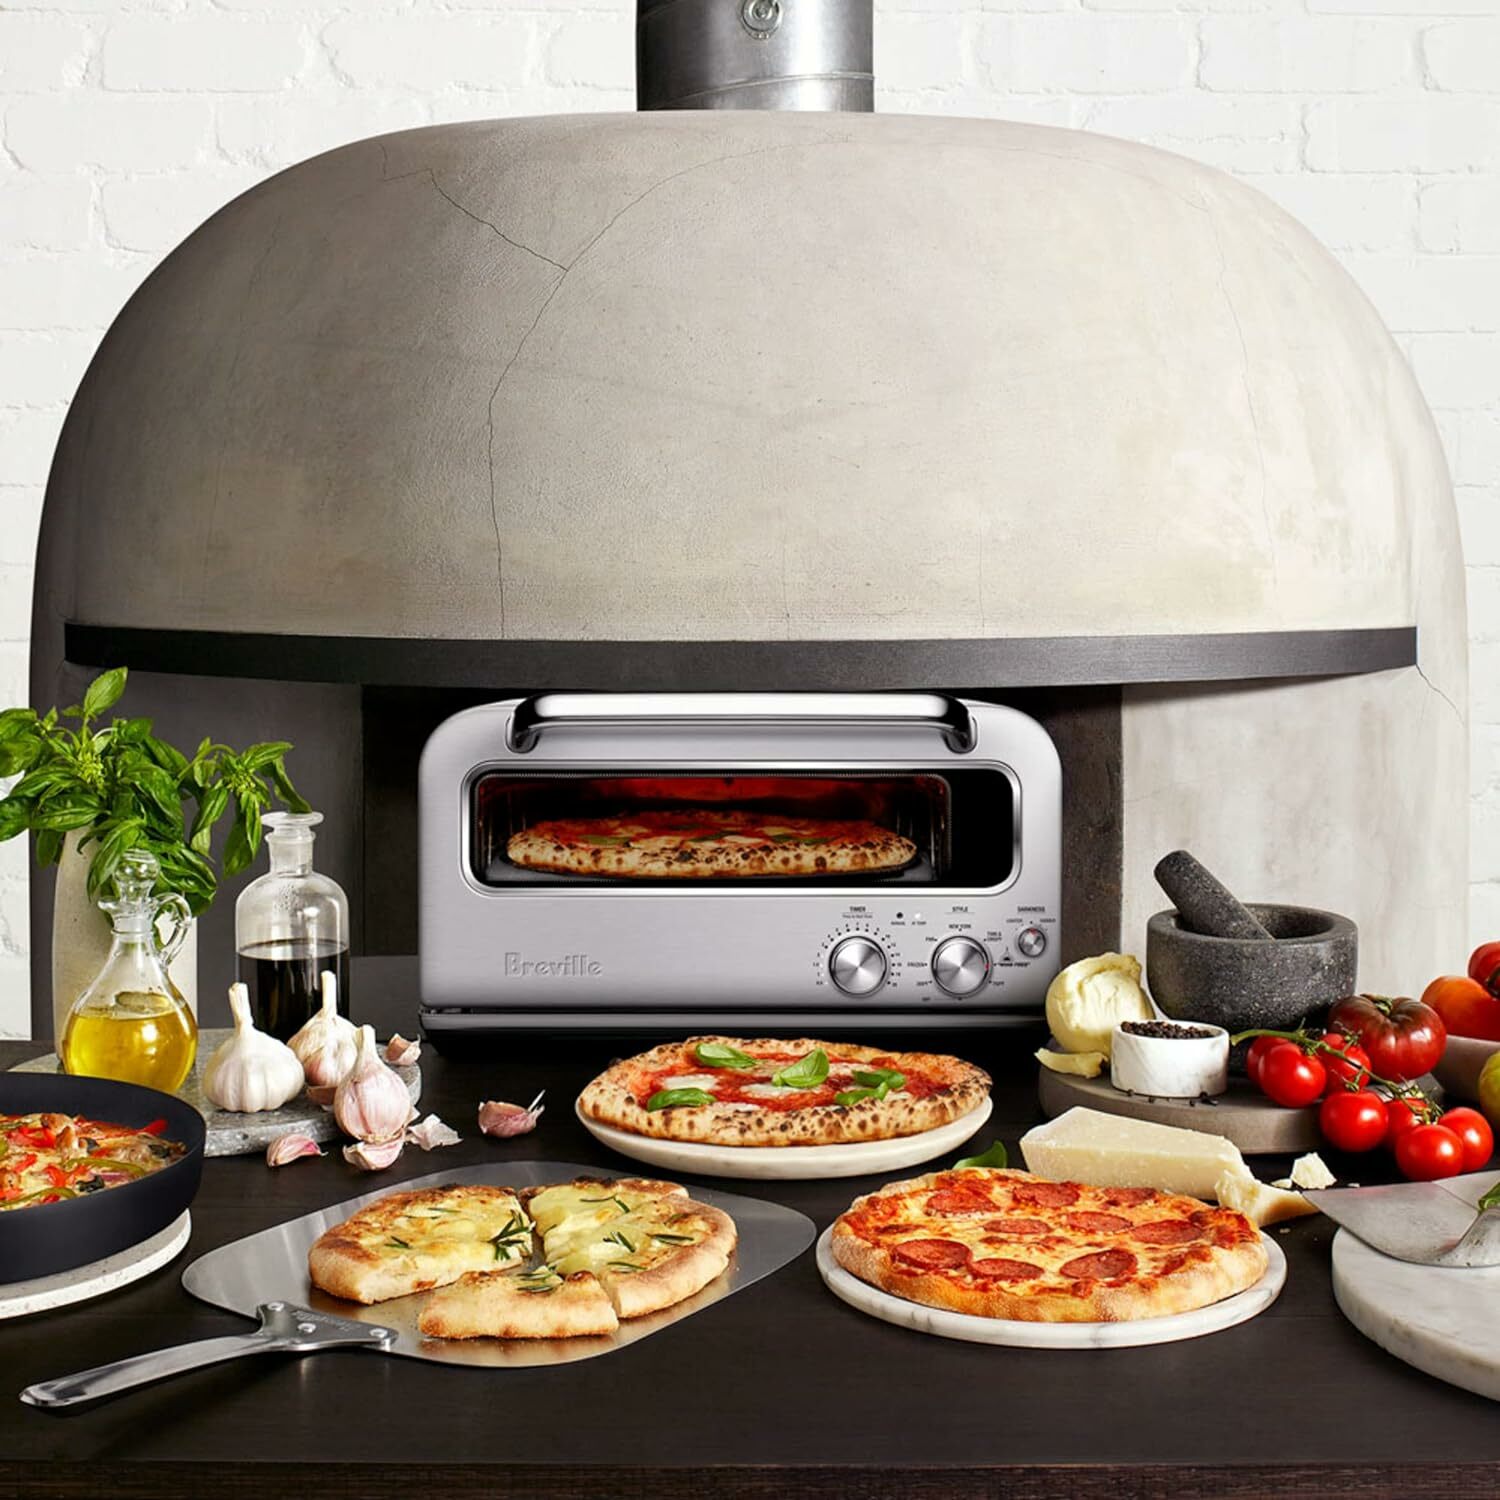 Spread of homemade pizzas in front of Breville pizza oven